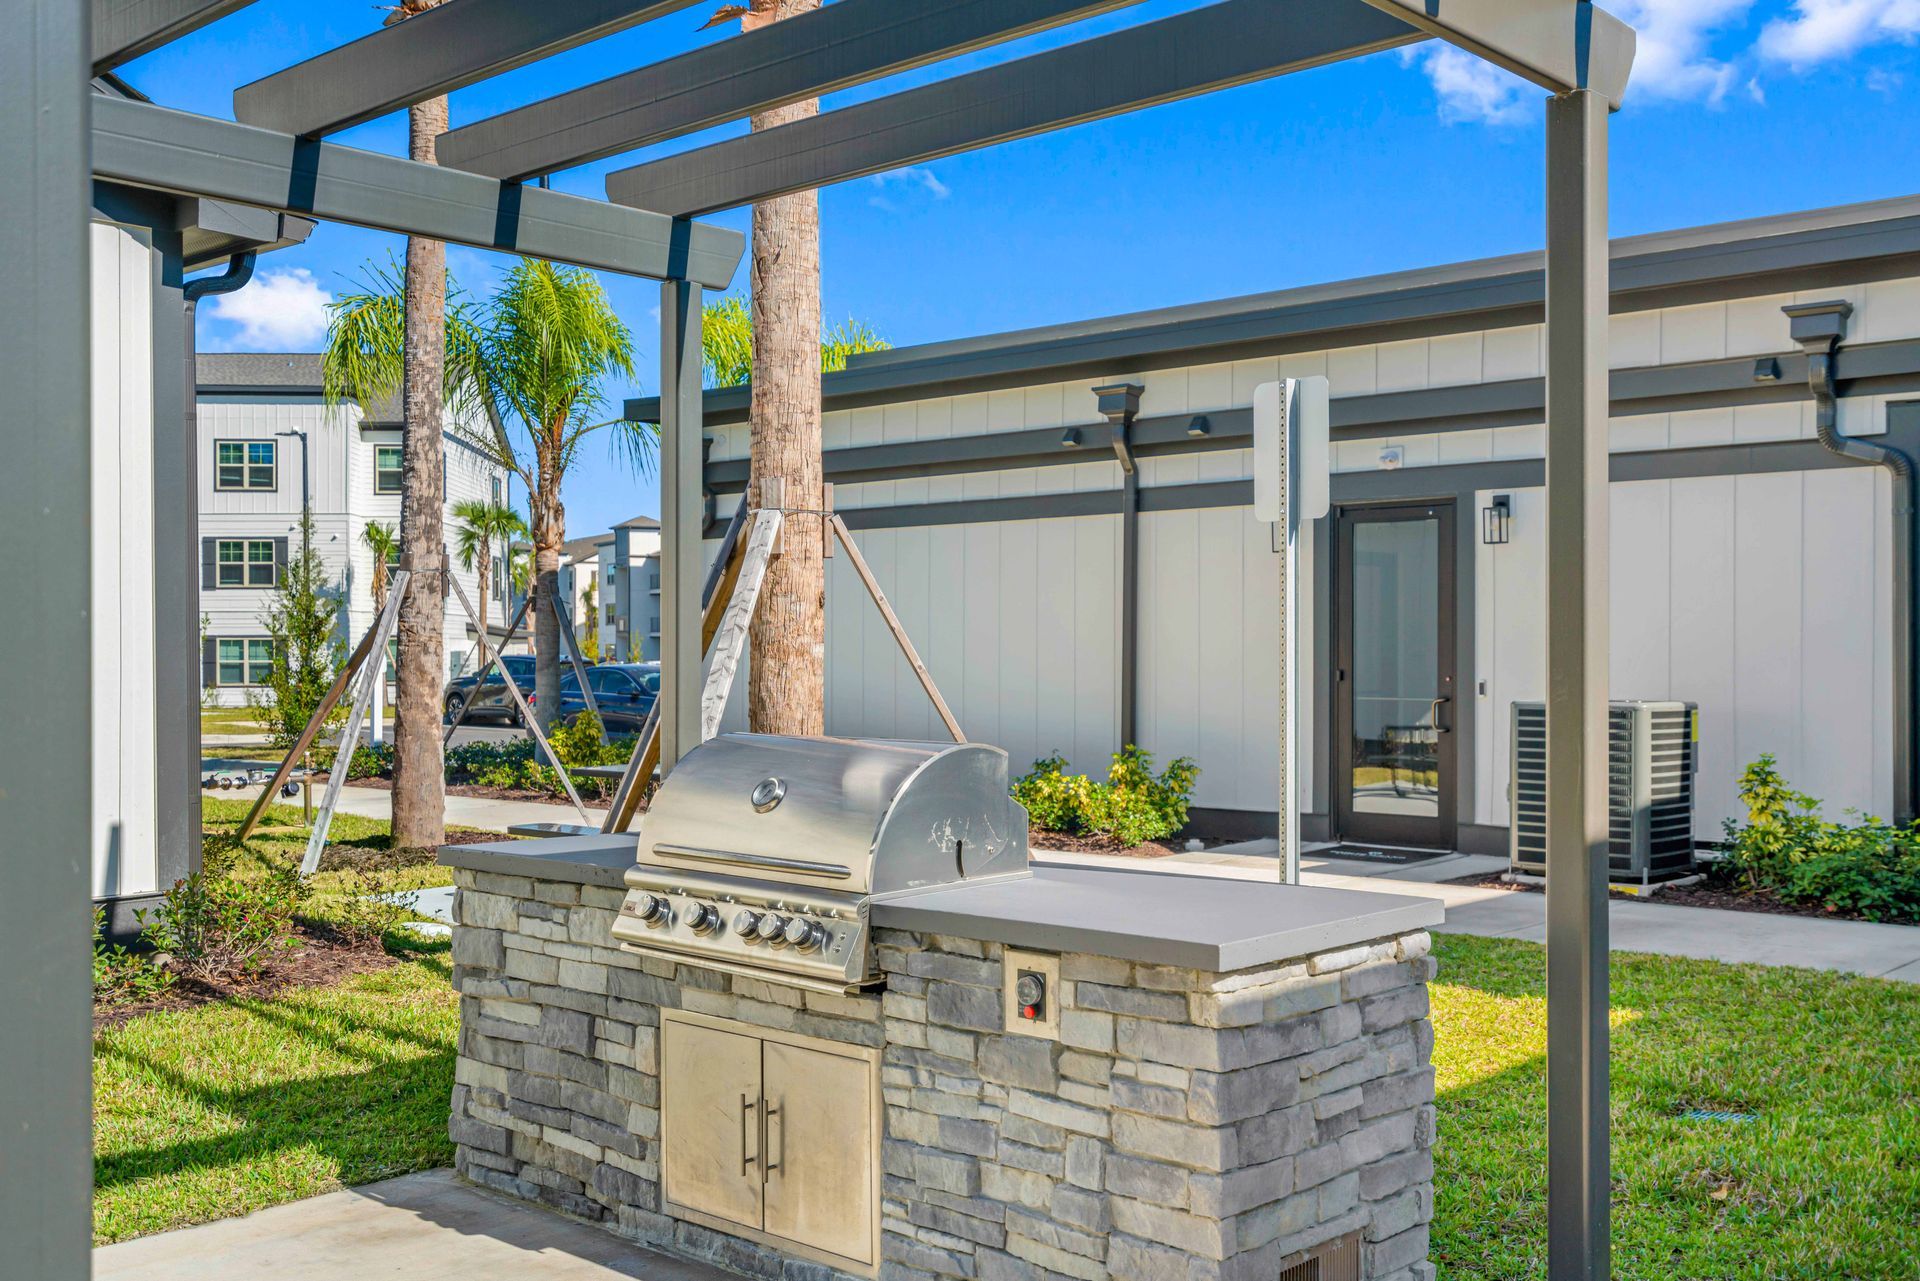 Grilling Station at Pointe Grand Palm Coast Apartments in Palm Coast, FL